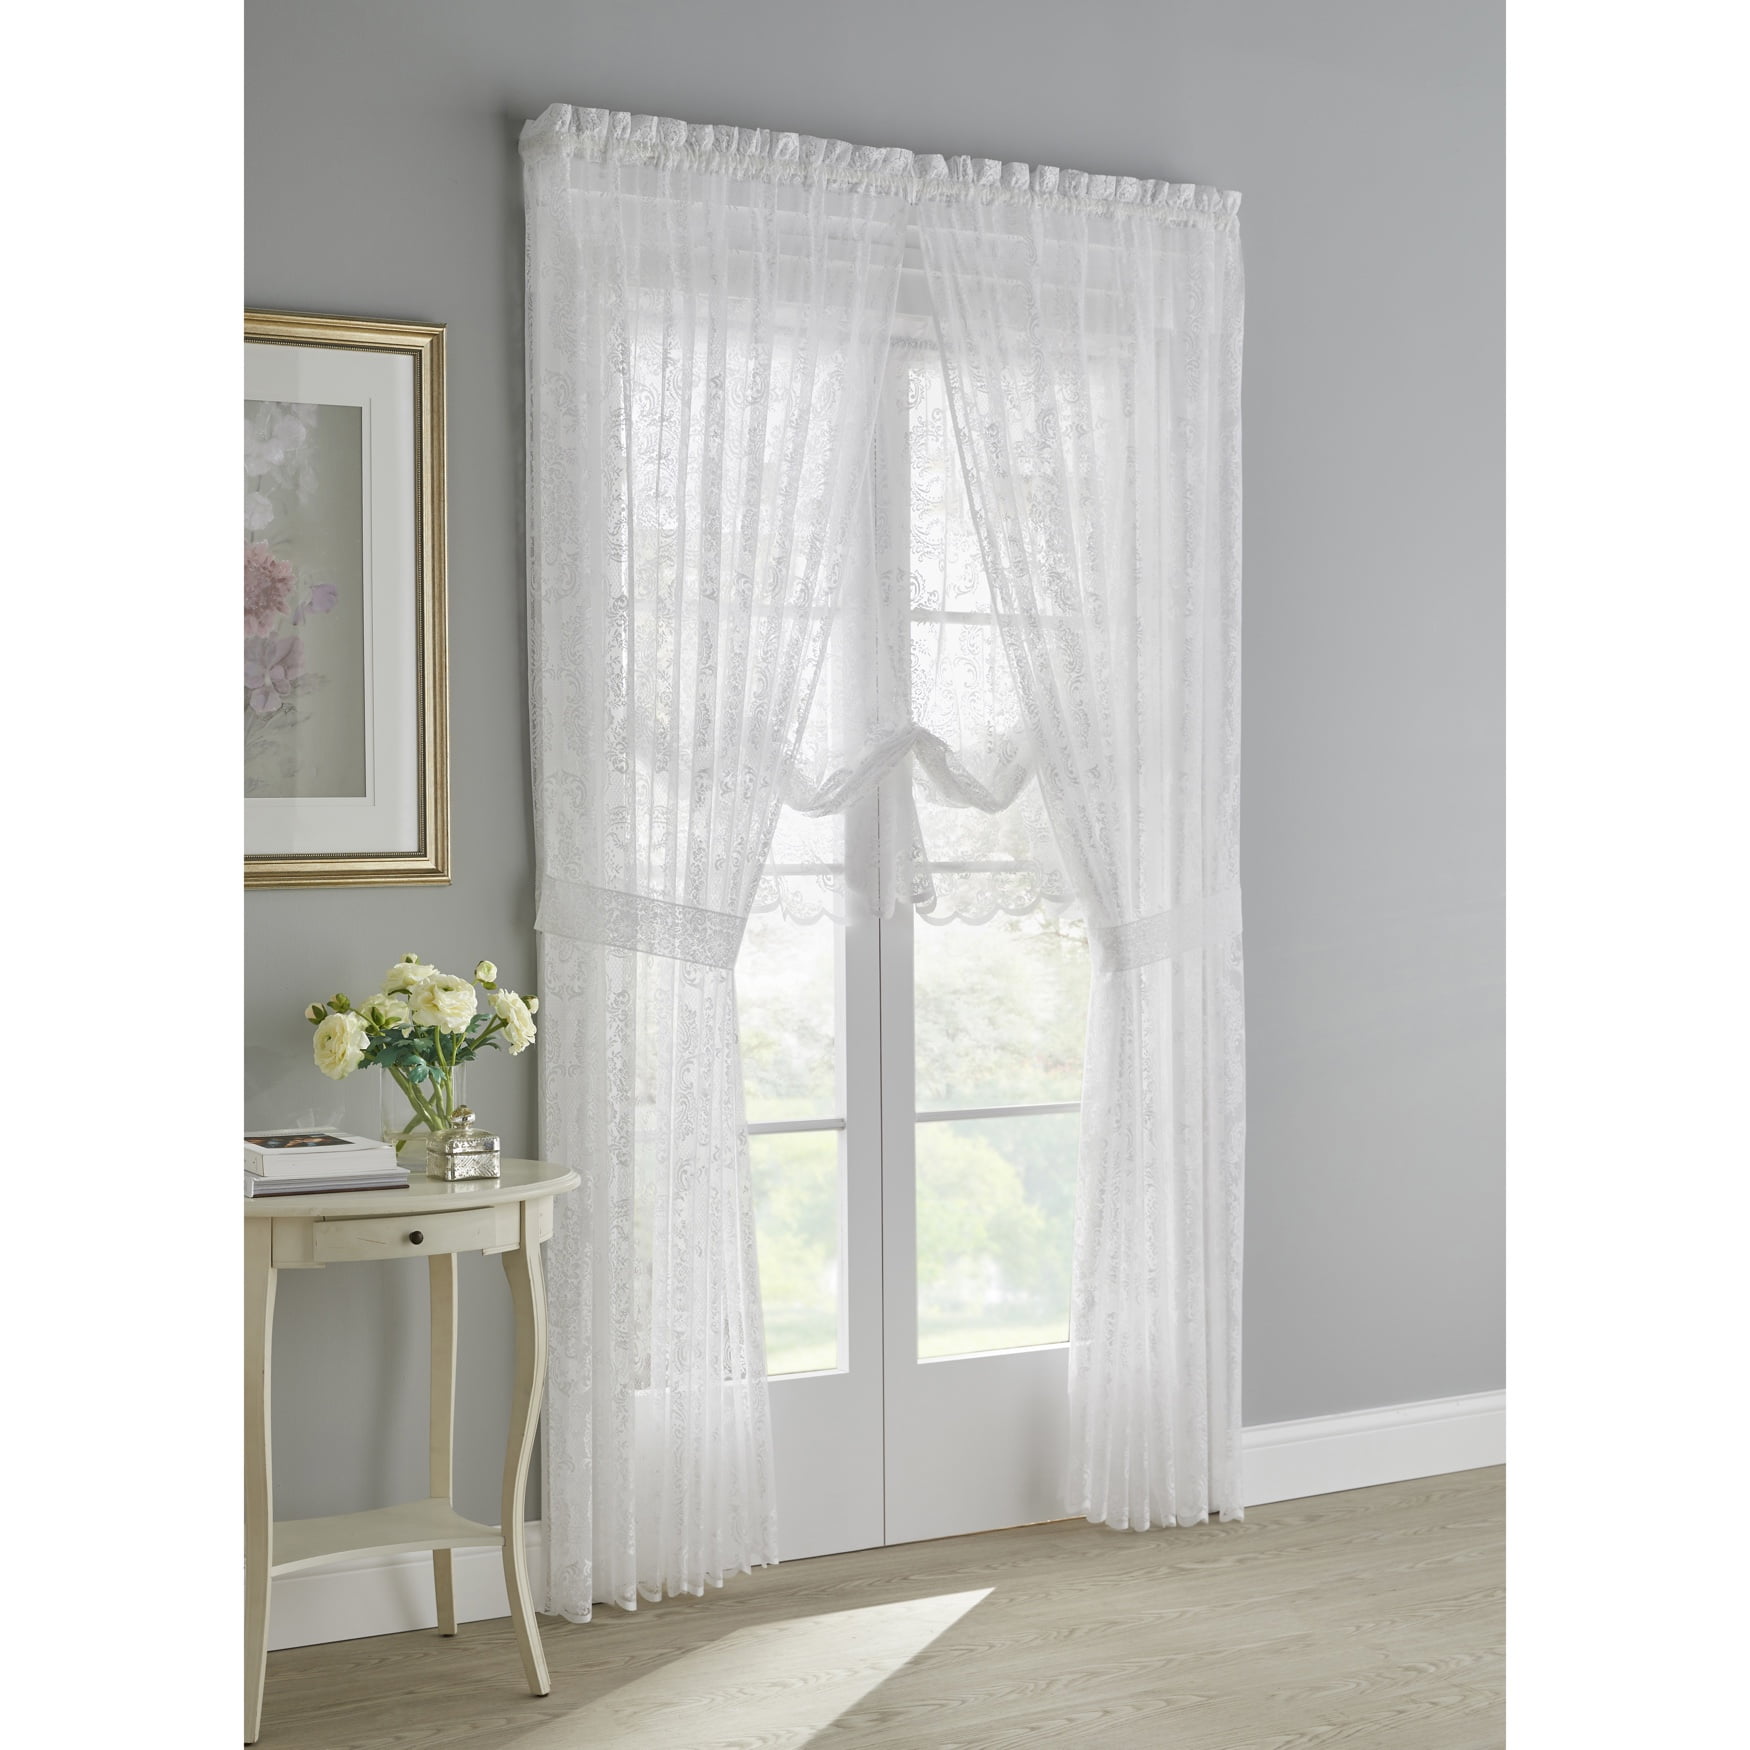 Elsa White Floral Net Curtain FREE DELIVERY Various Widths And Drops 